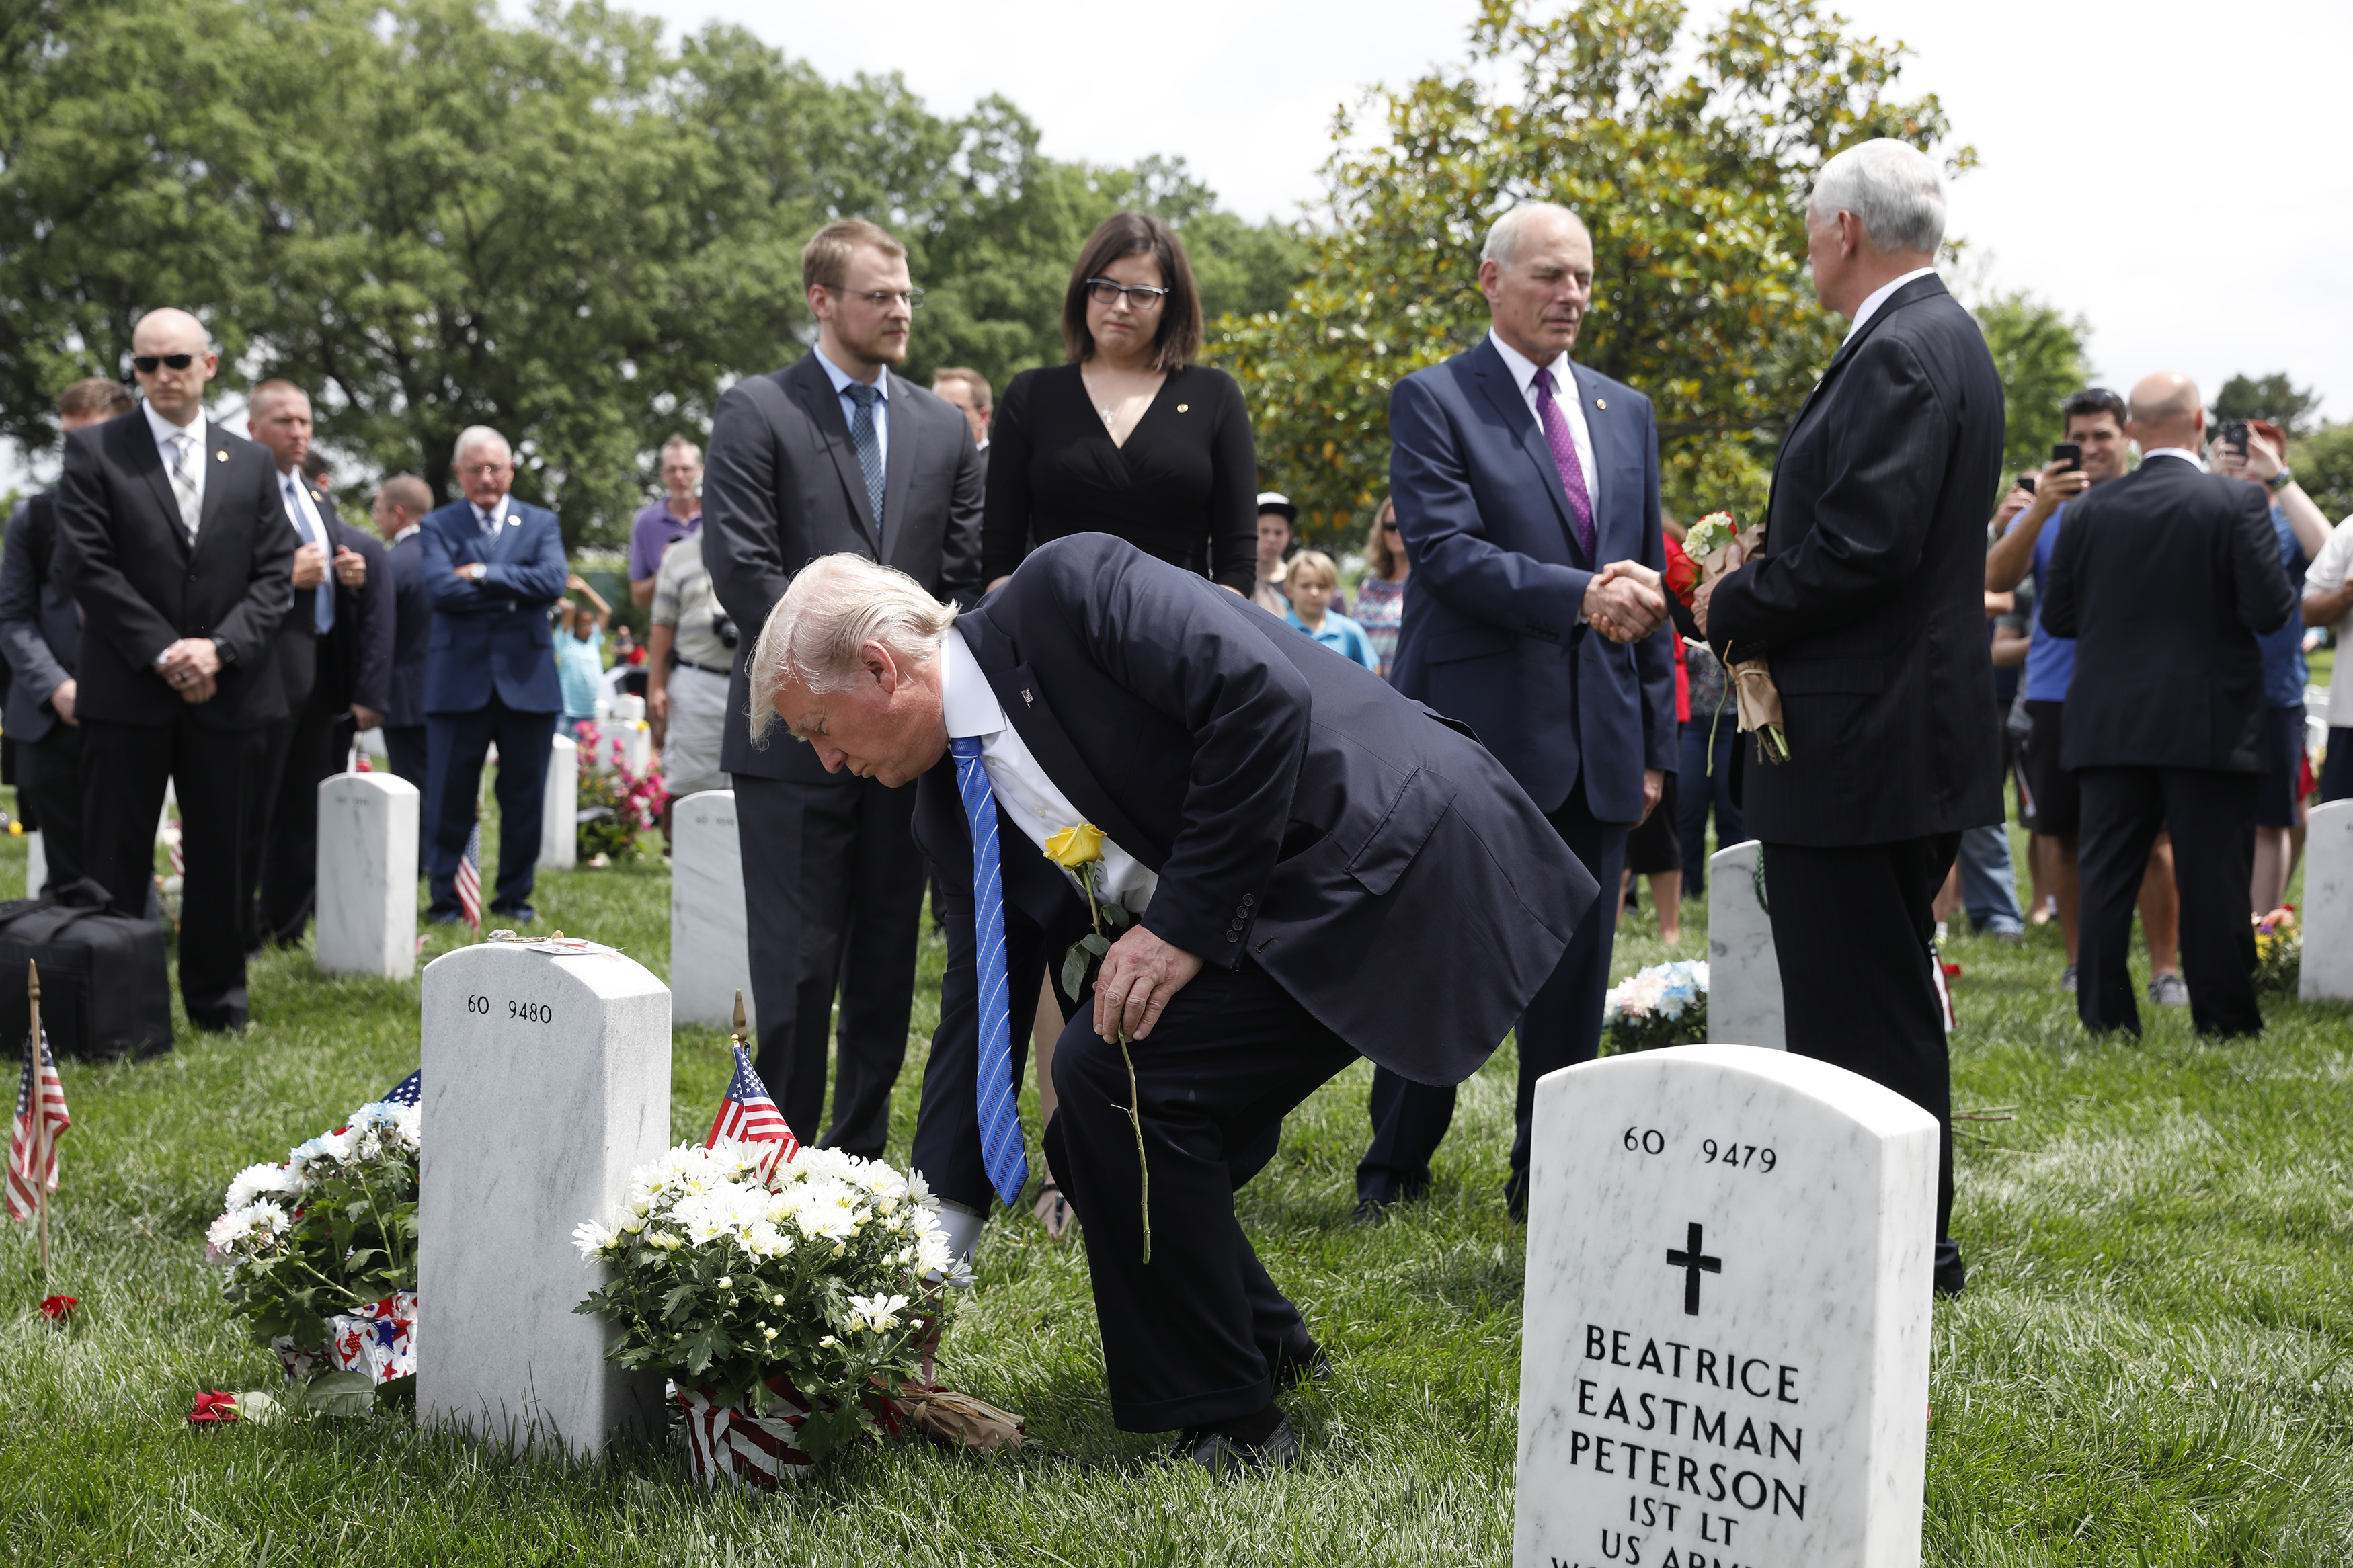 As Vice President Mike Pence and White House Chief of Staff John Kelly shake hands, President Donald Trump lays flowers on the grave of Kelly's son Robert at Arlington National Cemetery on May 29, 2017 in Arlington, Virginia. Marine Lieutenant Robert Kelly was killed in 2010 while leading a patrol in Afghanistan (Aaron P. Bernstein—Getty Images)